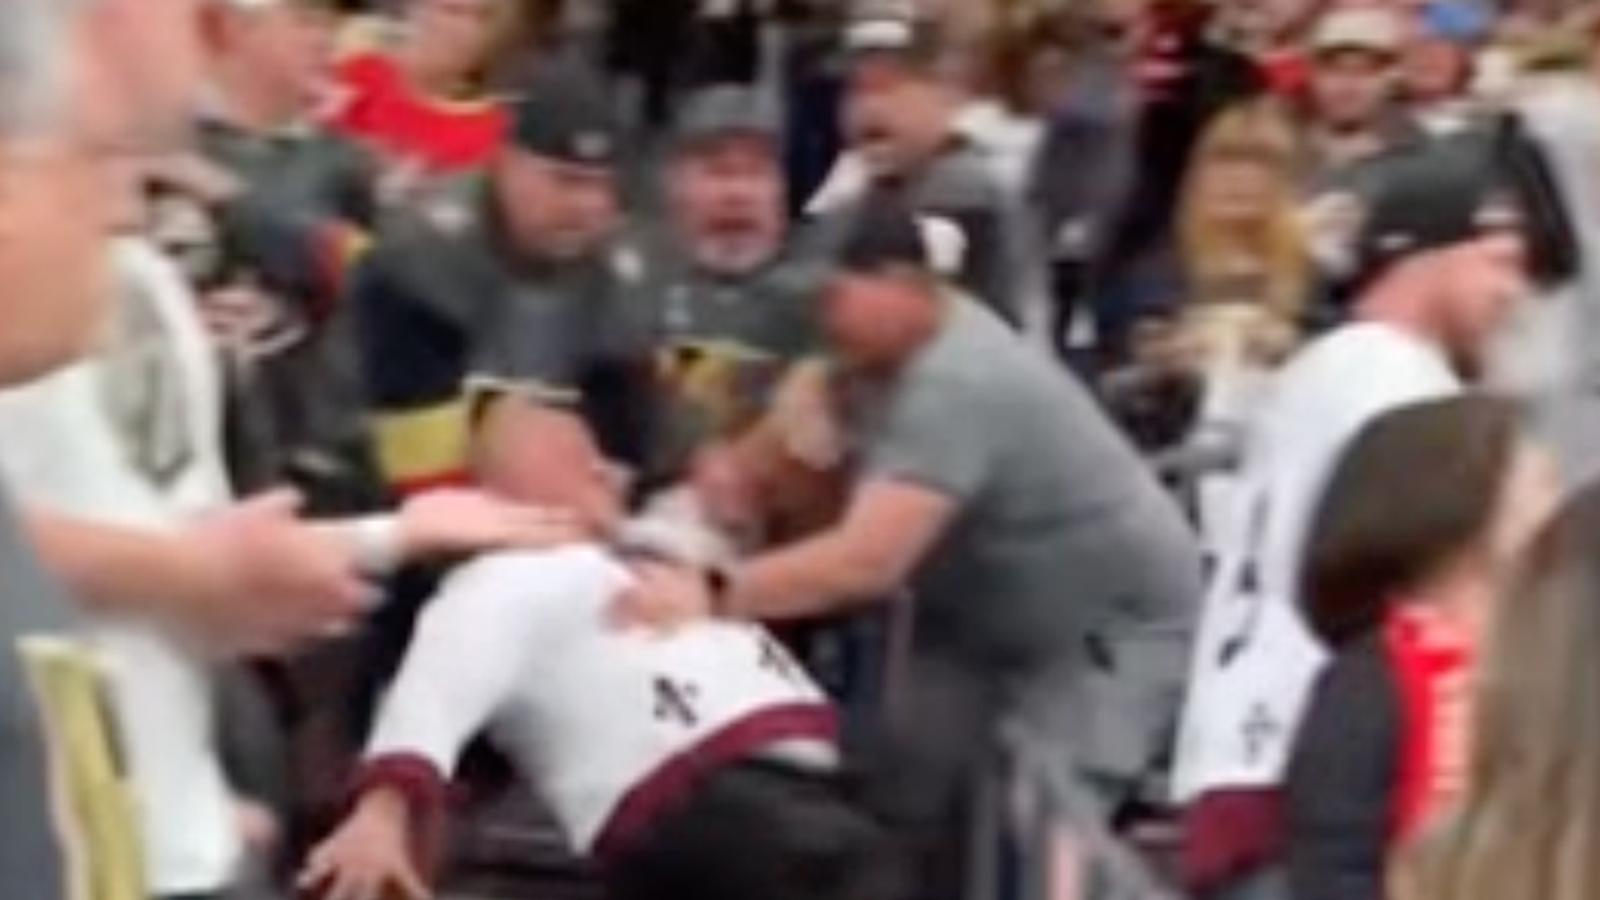 Fight breaks out in stands as Avs’ fans have gear stolen during Knights’ celebrations 